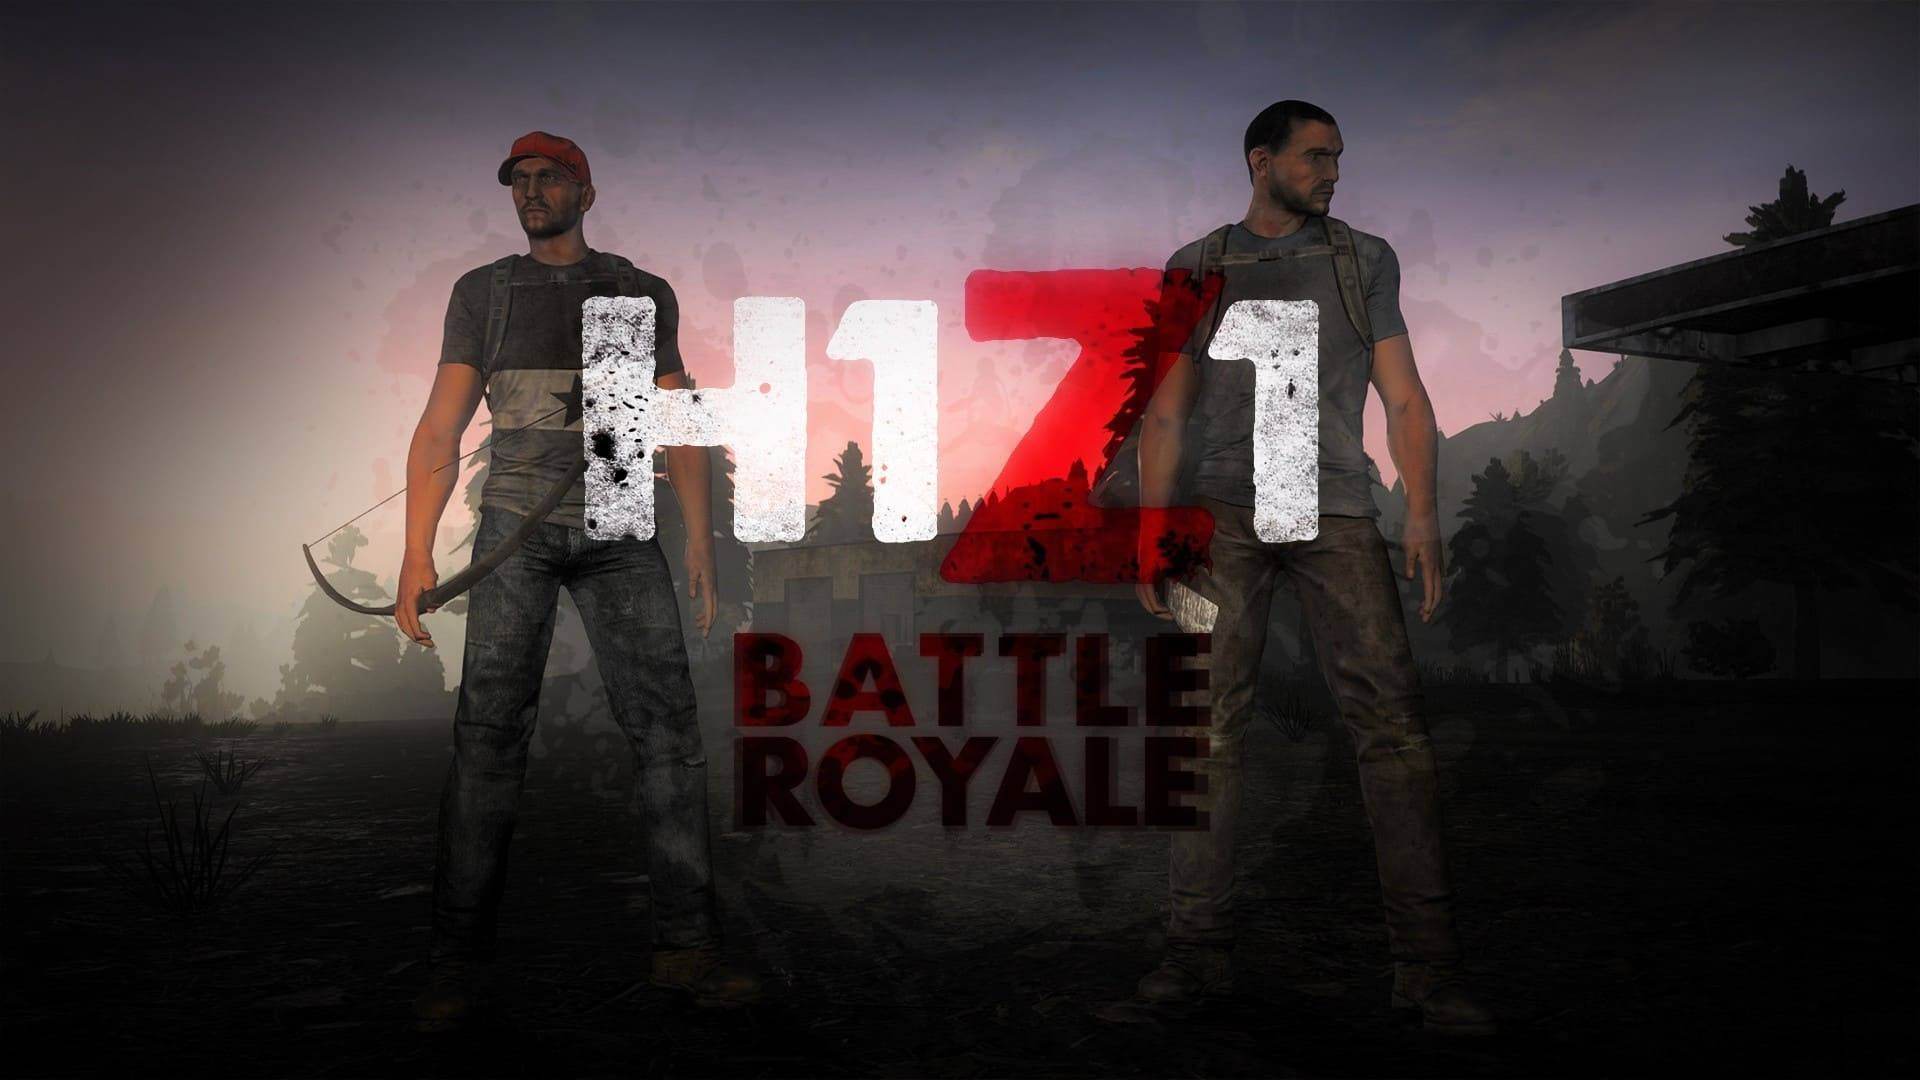 download h1z1 pc